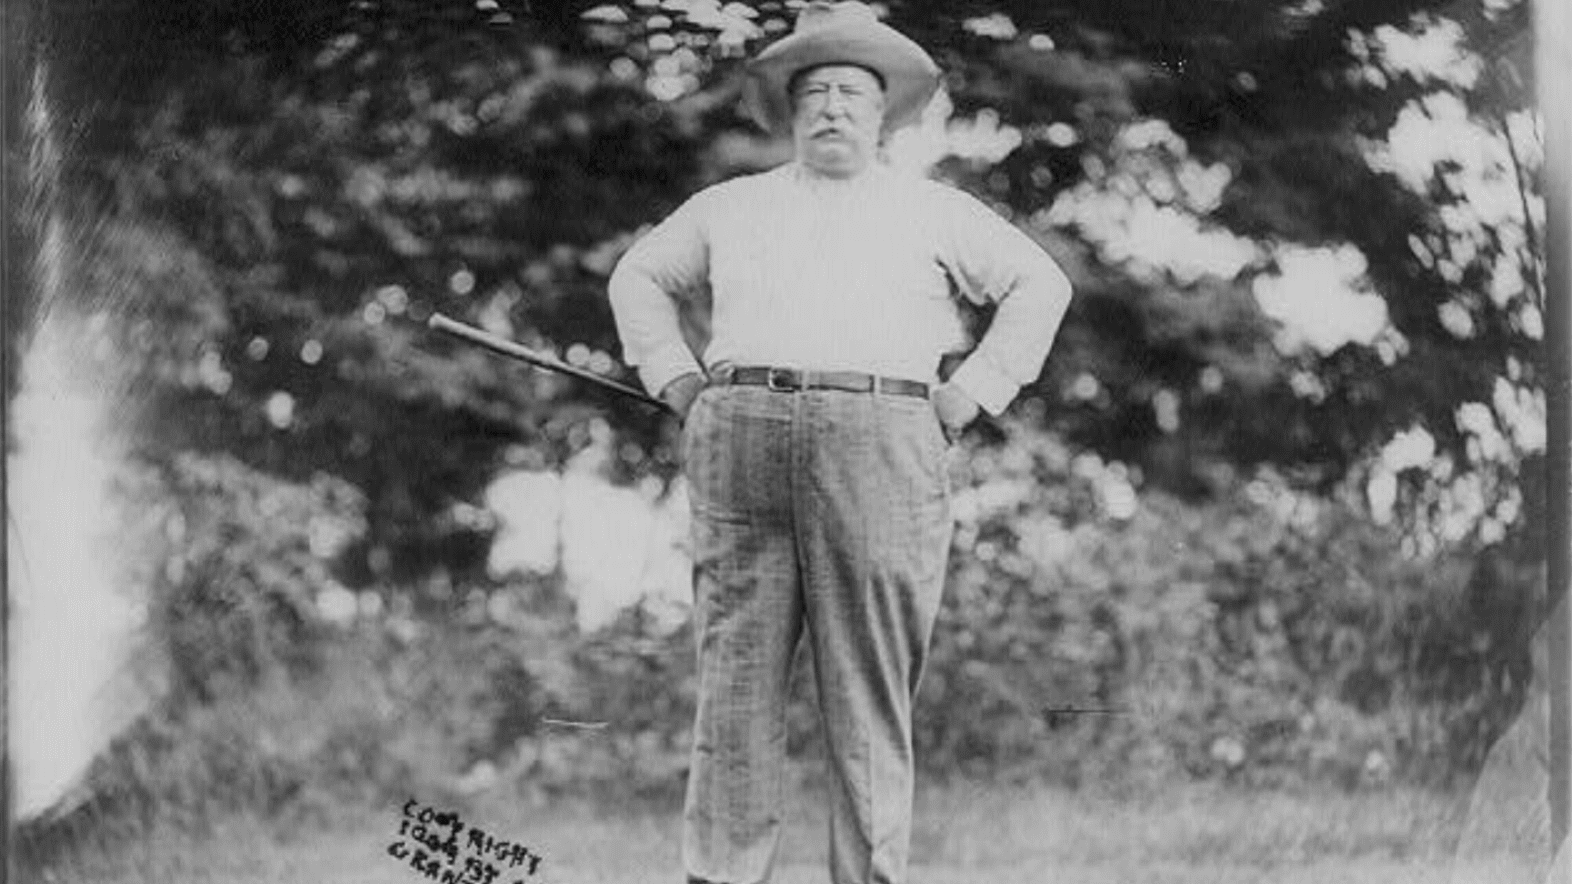 Political Golf Cartoon article on Presidential Golfers such as William Taft shown here with his golf club in hand.